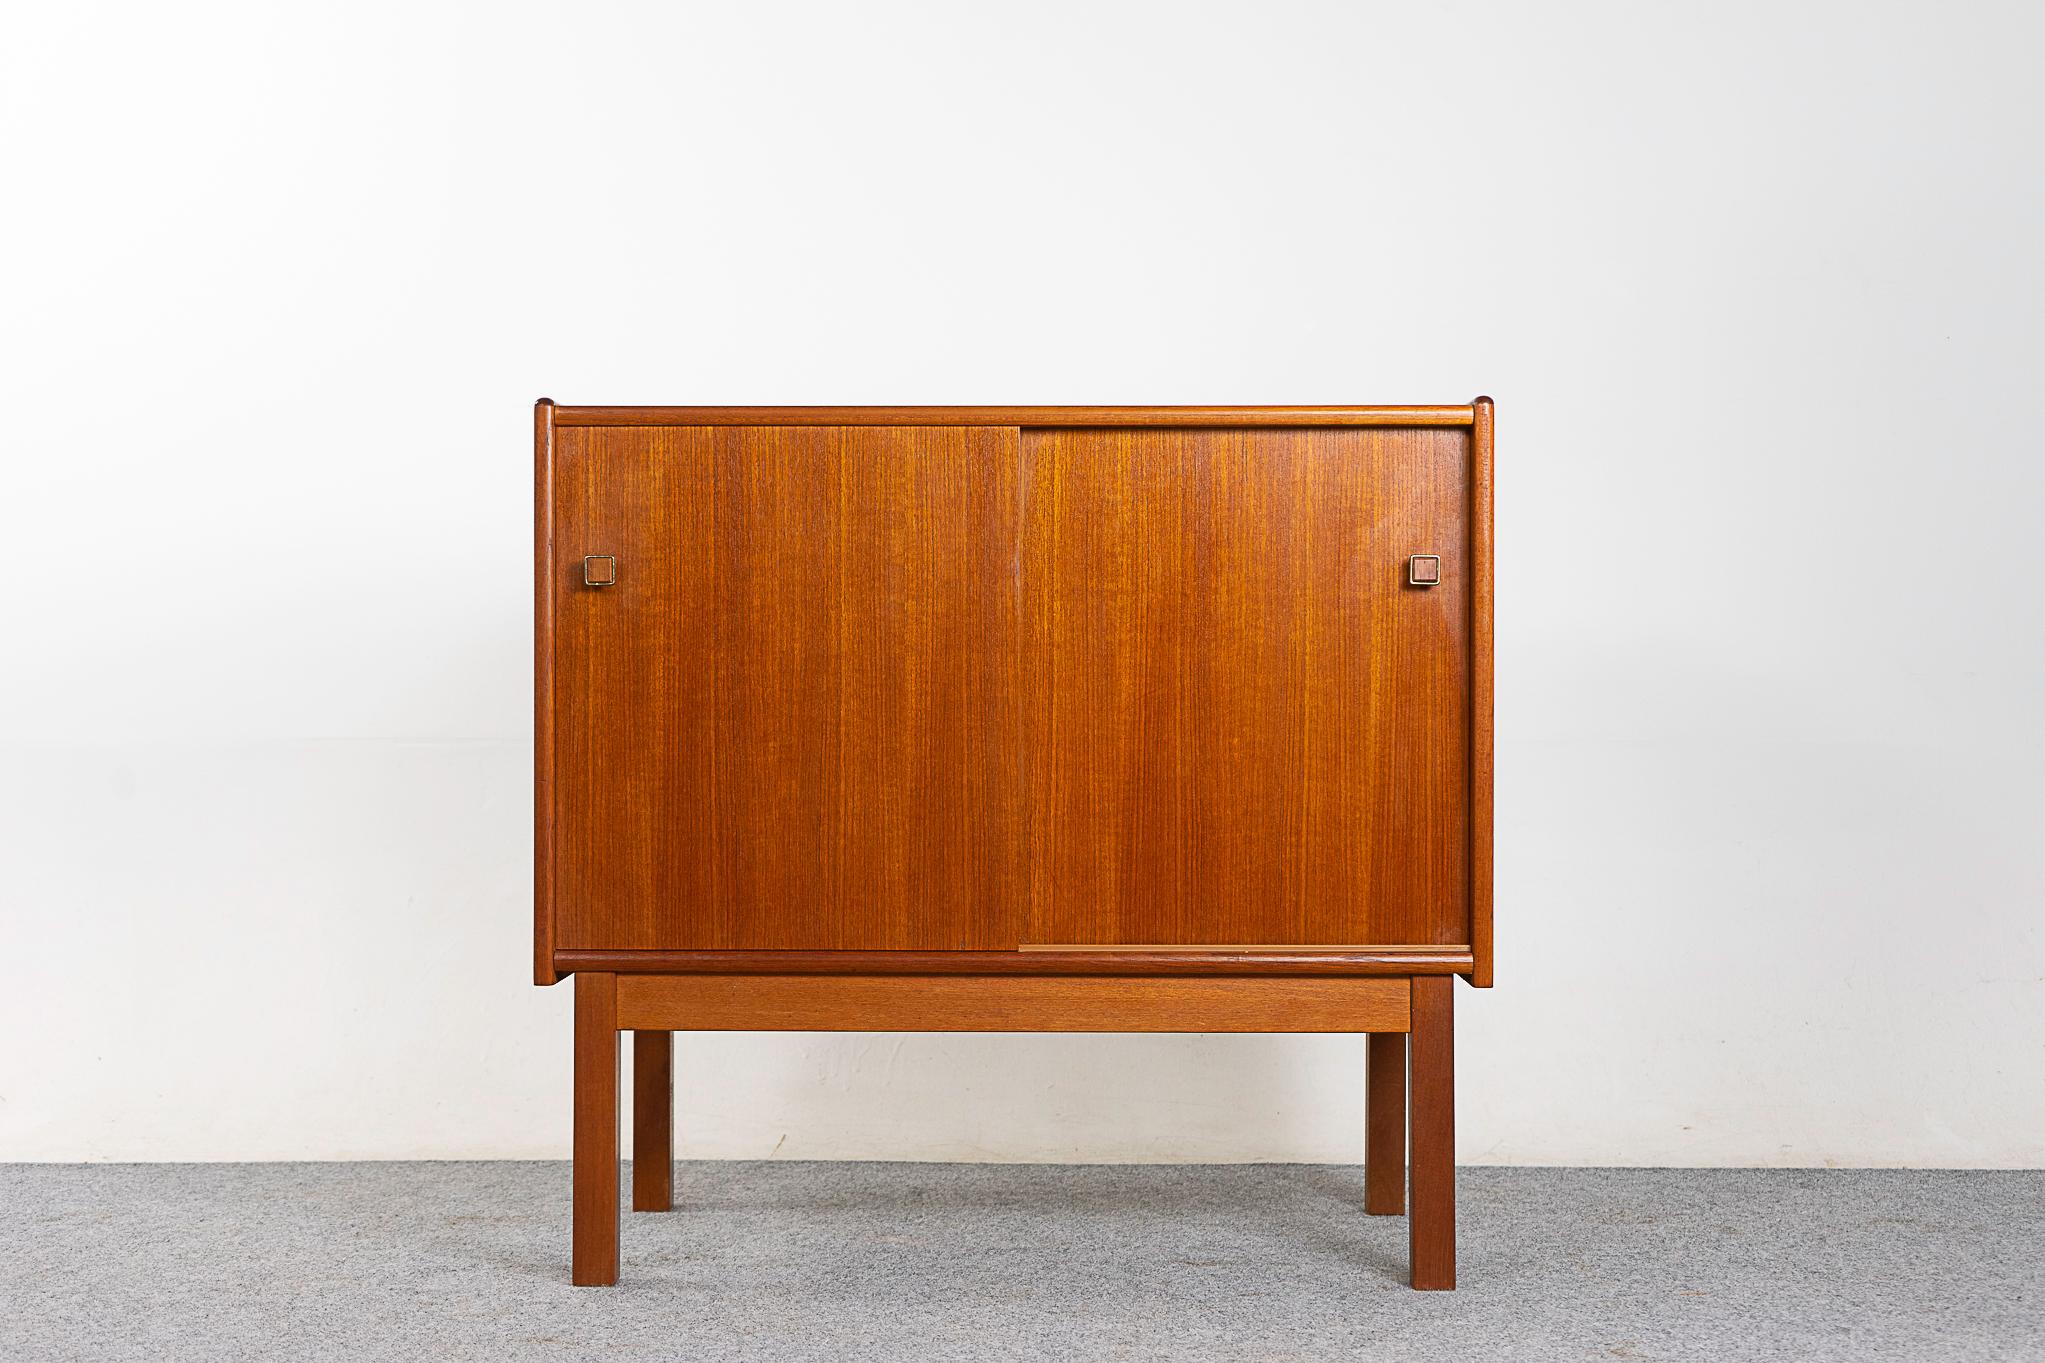 Teak Danish modern cabinet, circa 1960s. Low profile sliding door cabinet with interior shelf and darling pulls. Clean, simple lined design with lovely book-matched veneer. We have a matching pair, which would look 